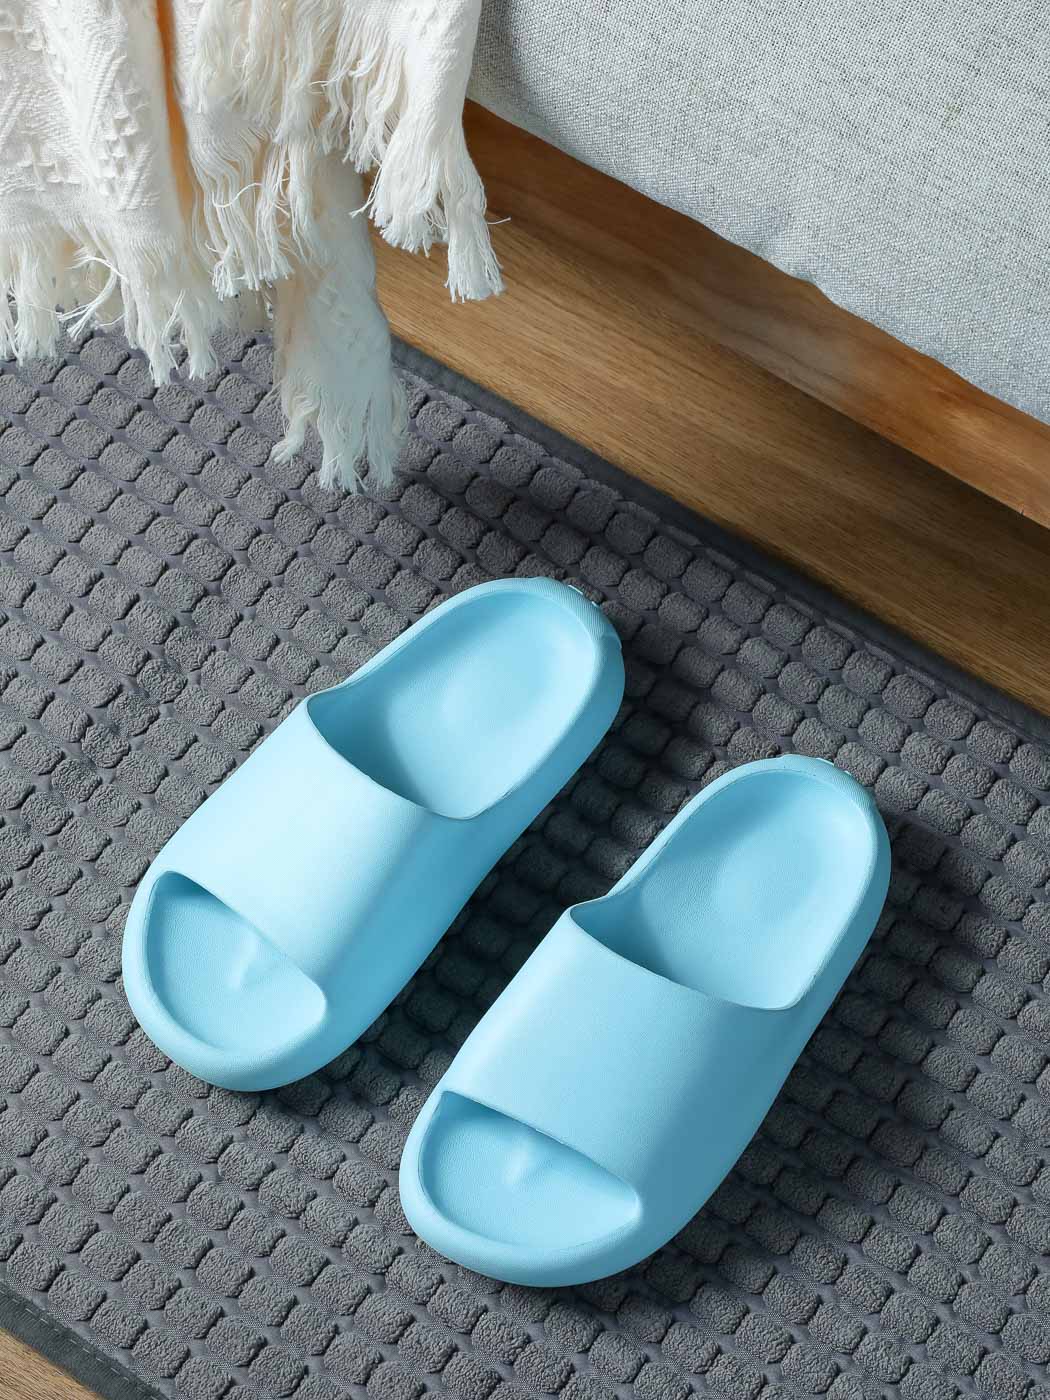 MINISO CANDY COLOR BATH SLIPPERS (39-40,LIGHT BLUE) 2012604515147 BATHROOM SLIPPERS